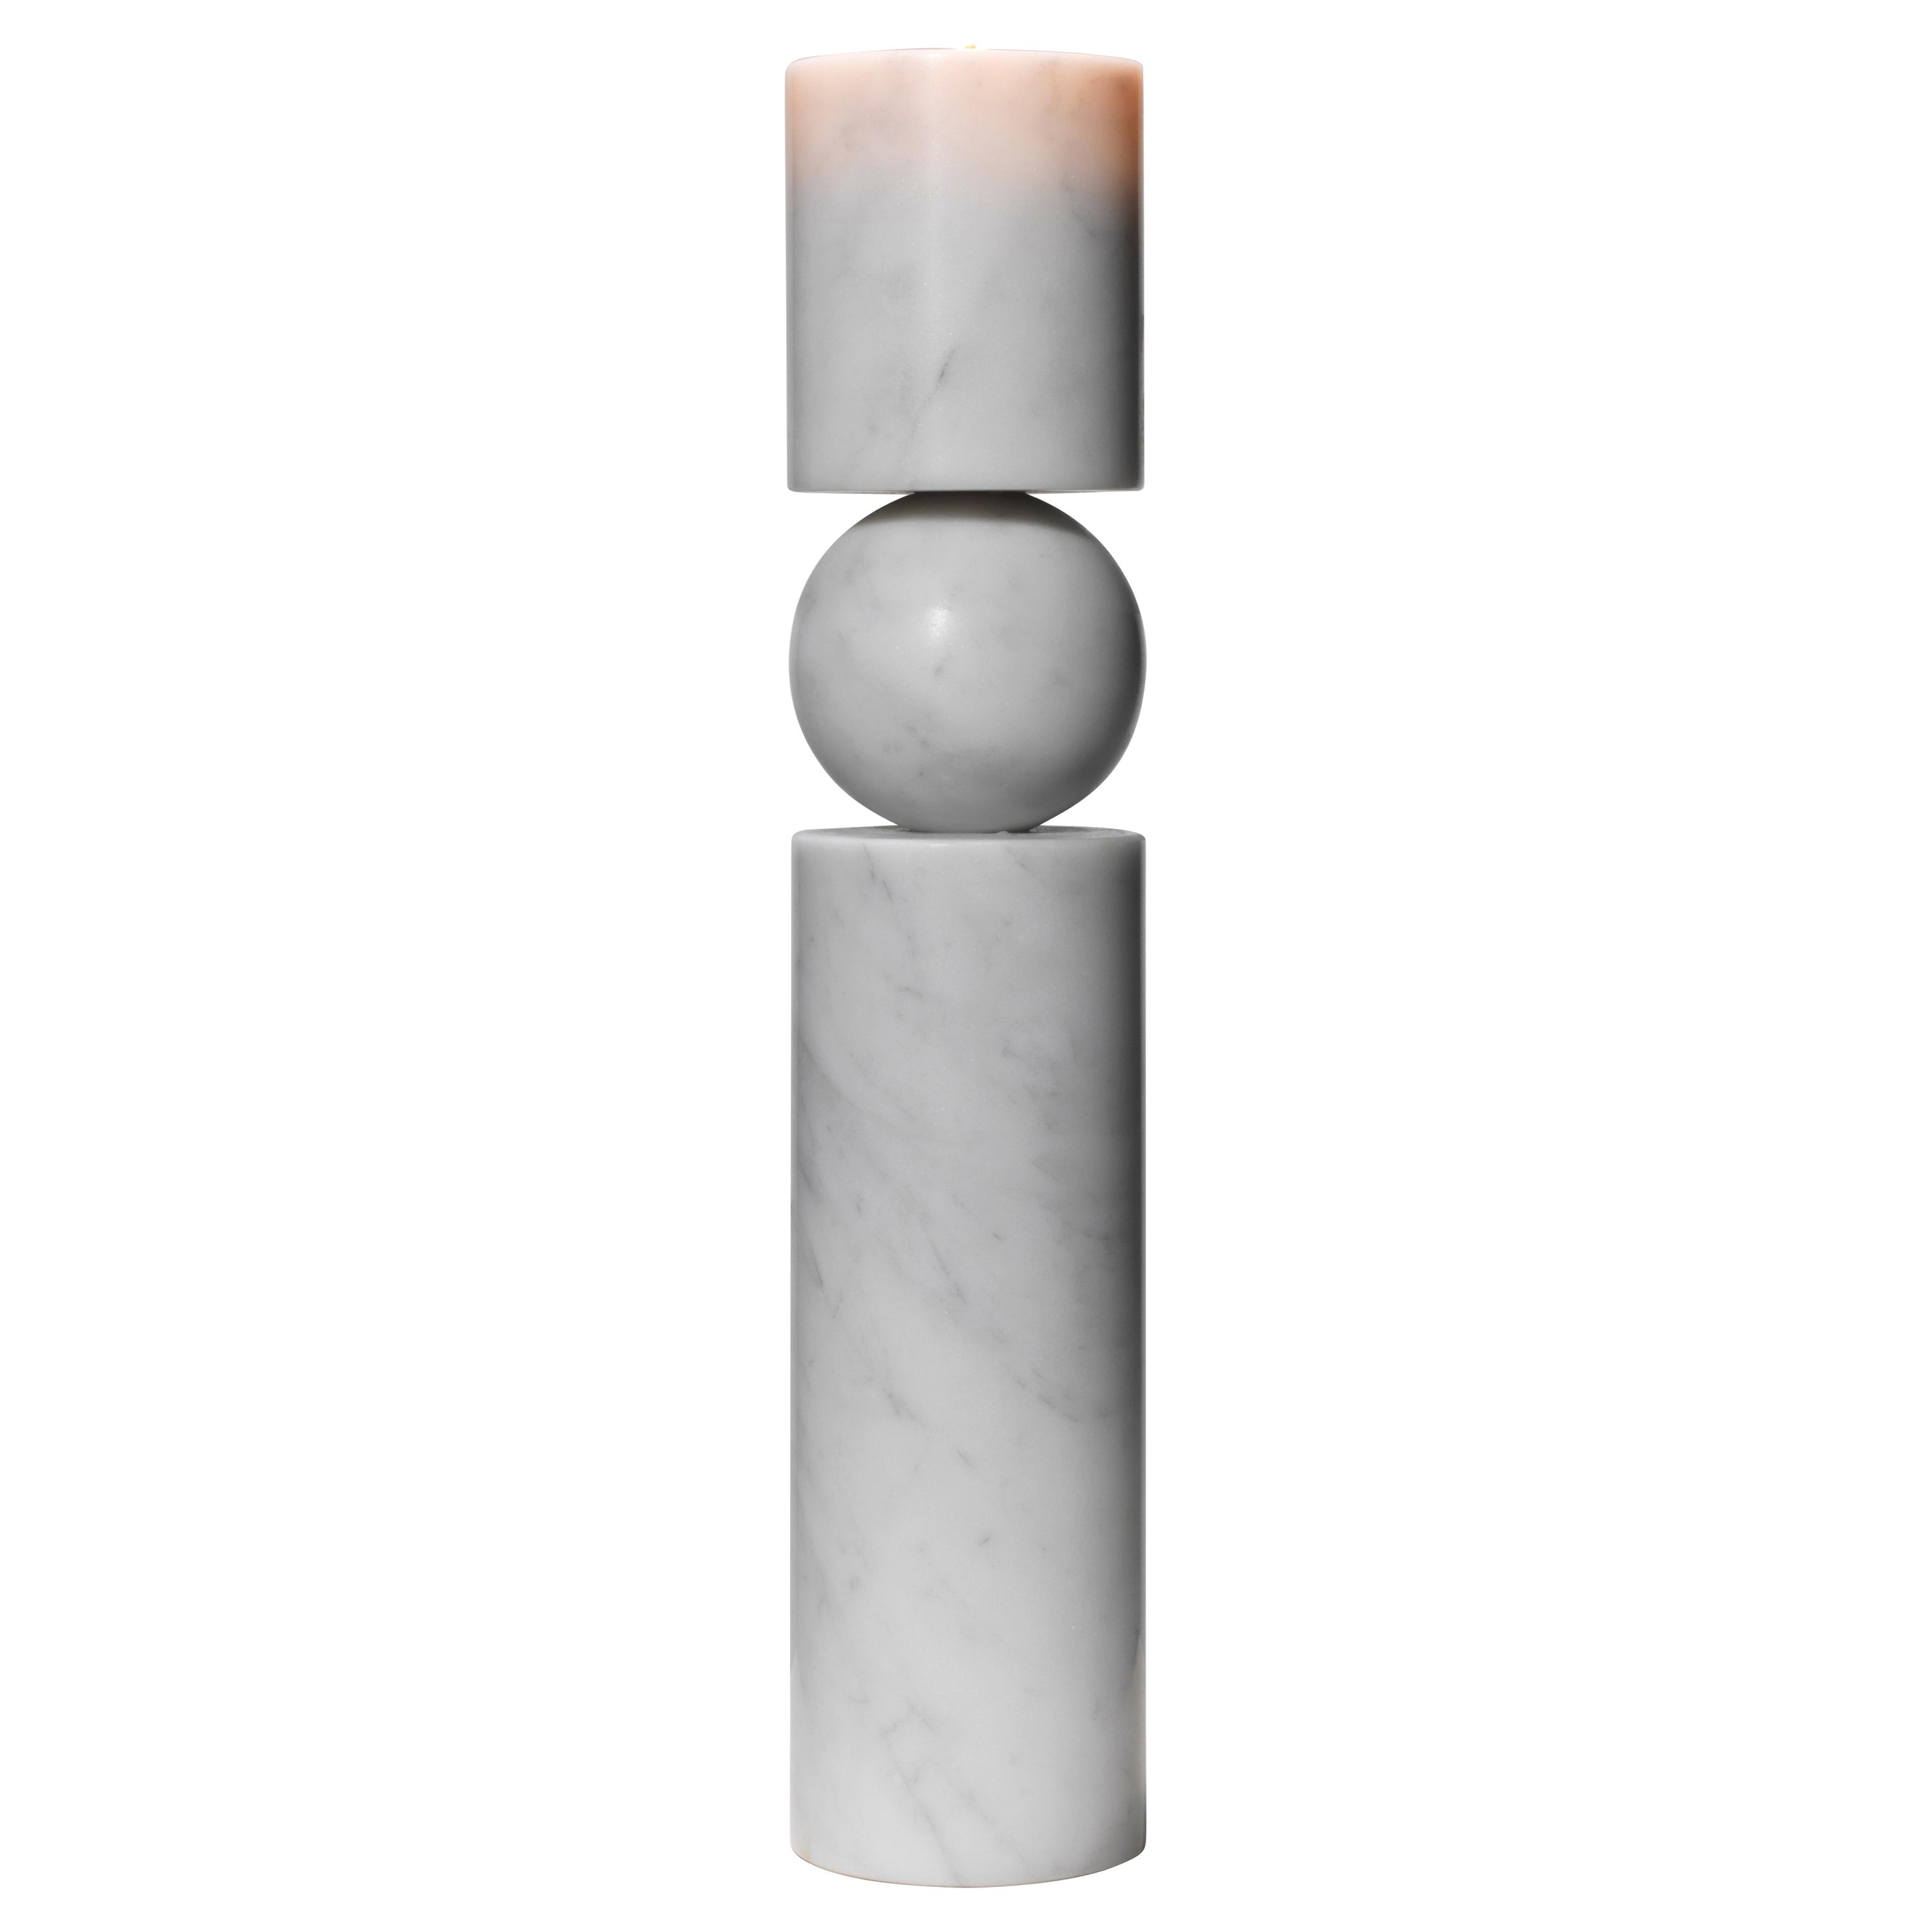 Lee Broom - Fulcrum Candlestick White Marble - Large